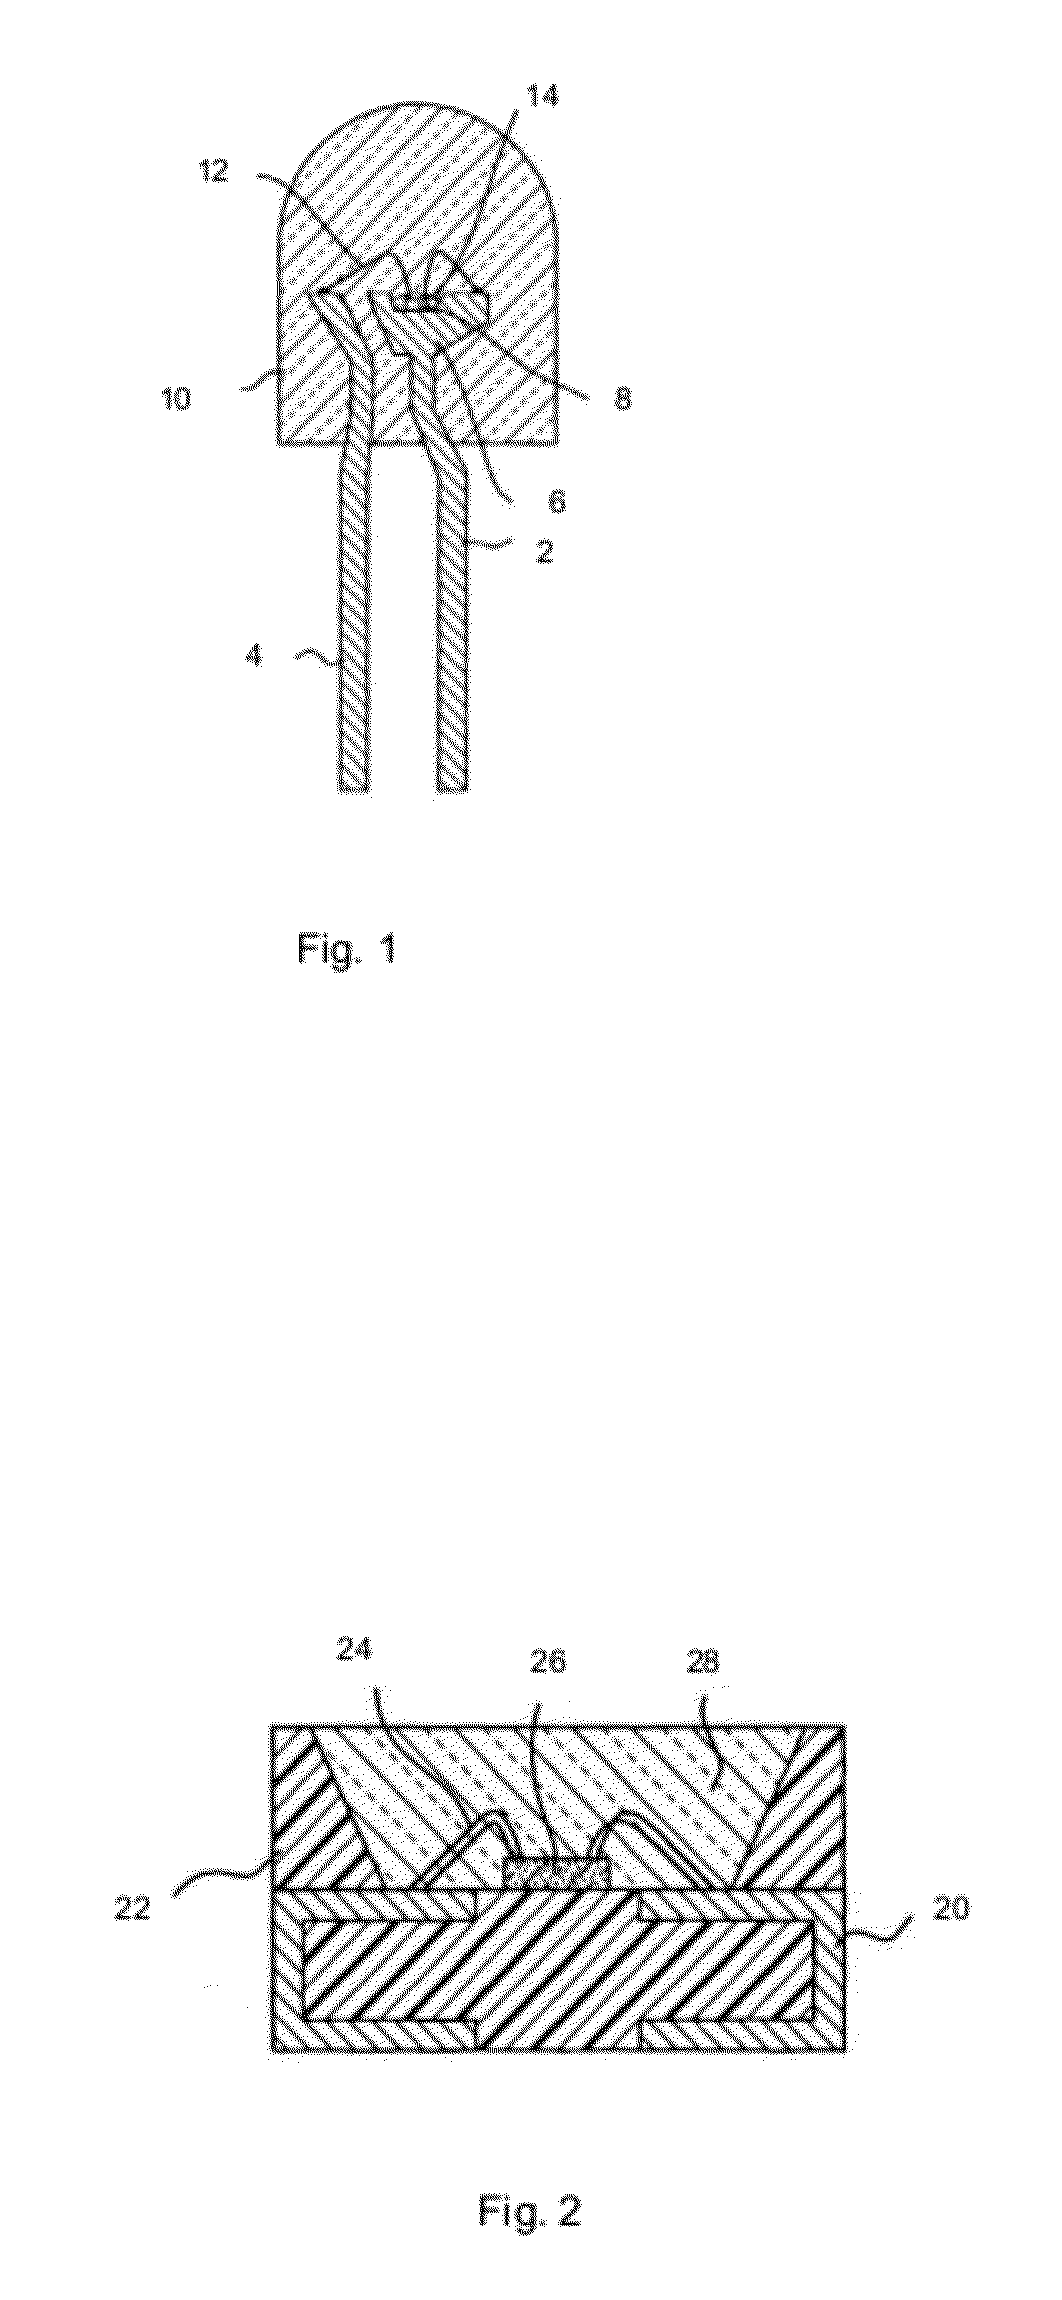 Systems and methods for producing white-light light emitting diodes